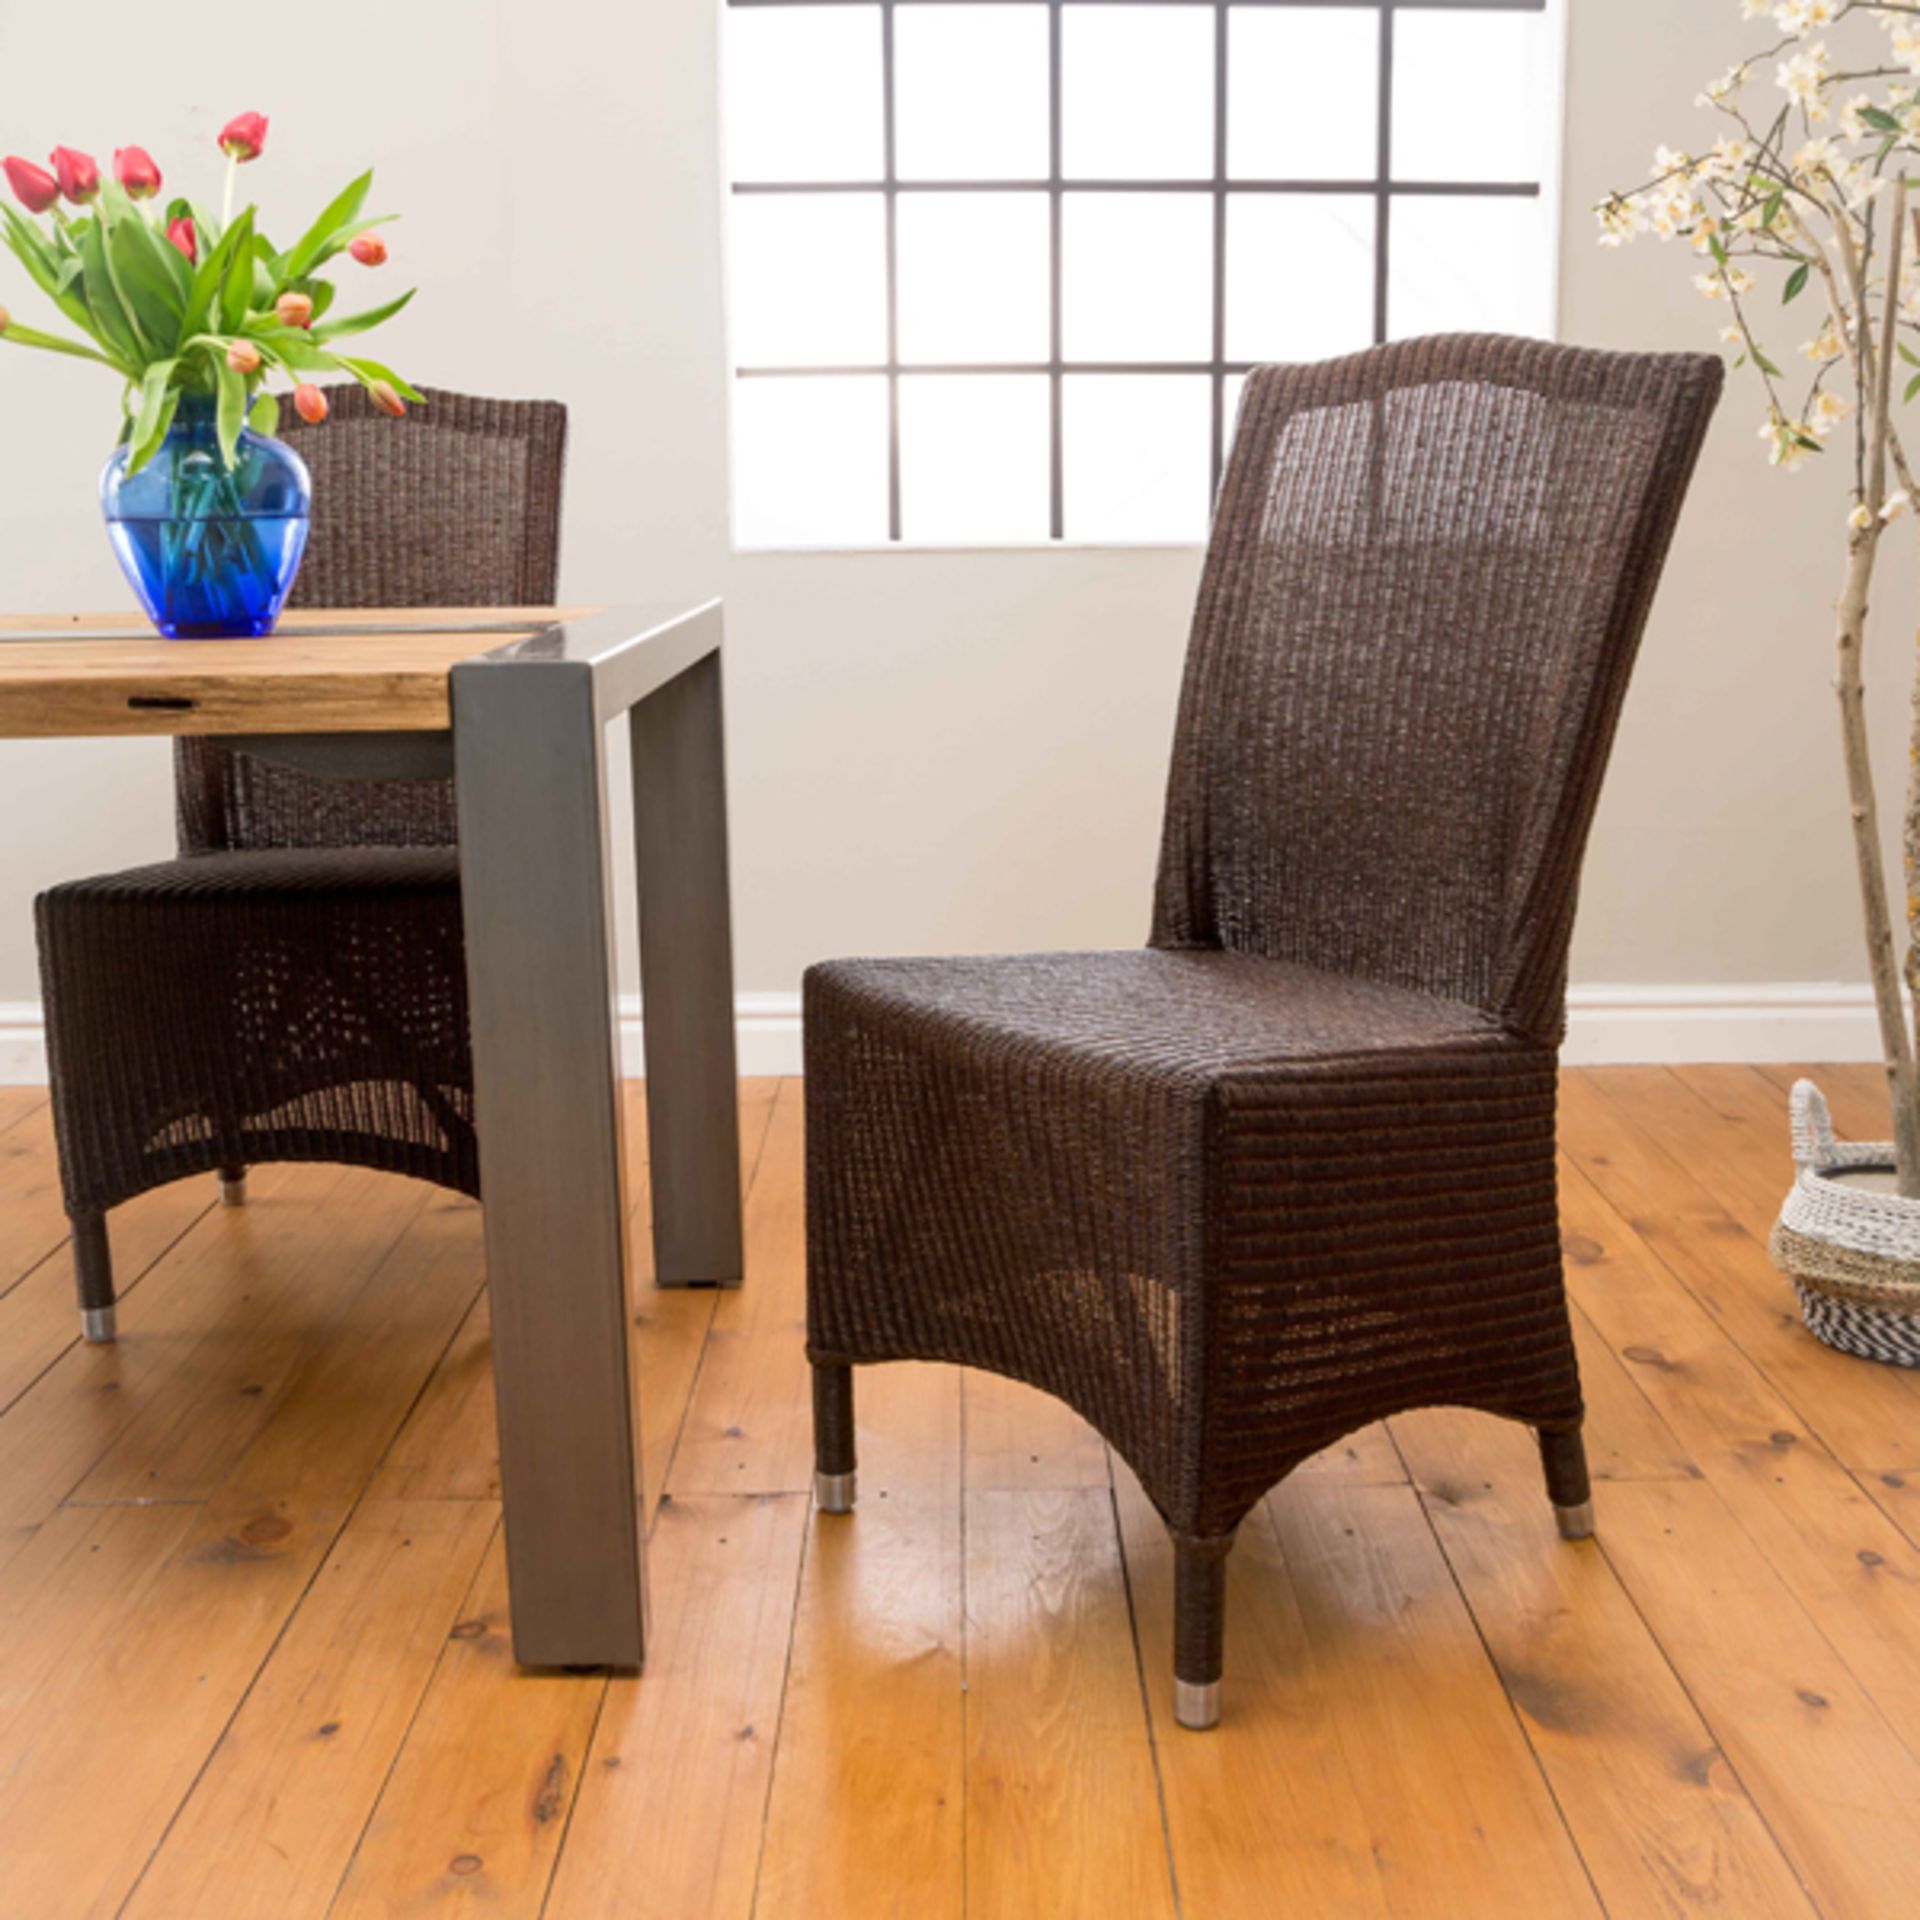 A Pair Of Classic Lloyd Loom Chairs Colonial Brown 40 X 60 X 100cm (Loc Oal01d) - Image 3 of 4